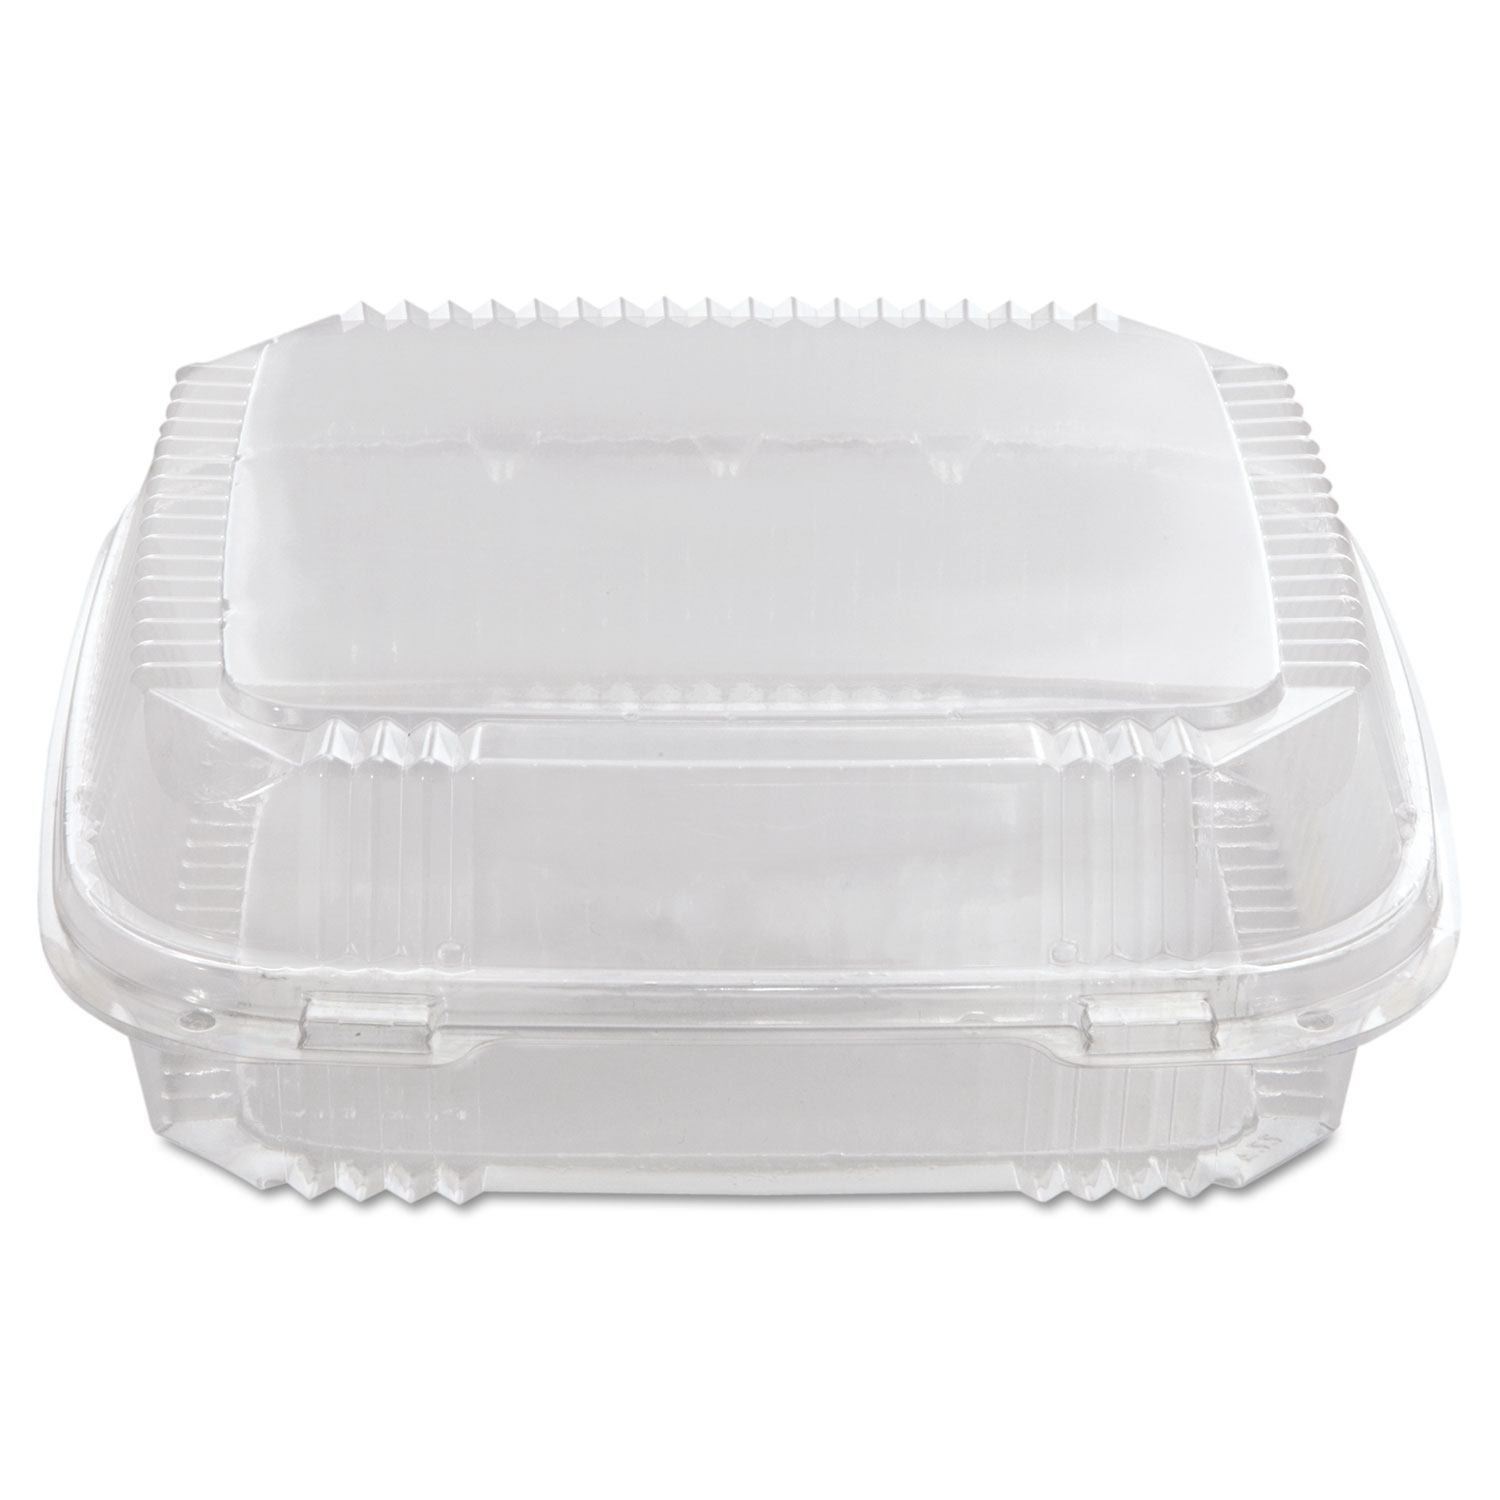 ClearView SmartLock Containers, 49oz, 8 13/64 x 8 11/32 x 2 29/32, 200/Carton